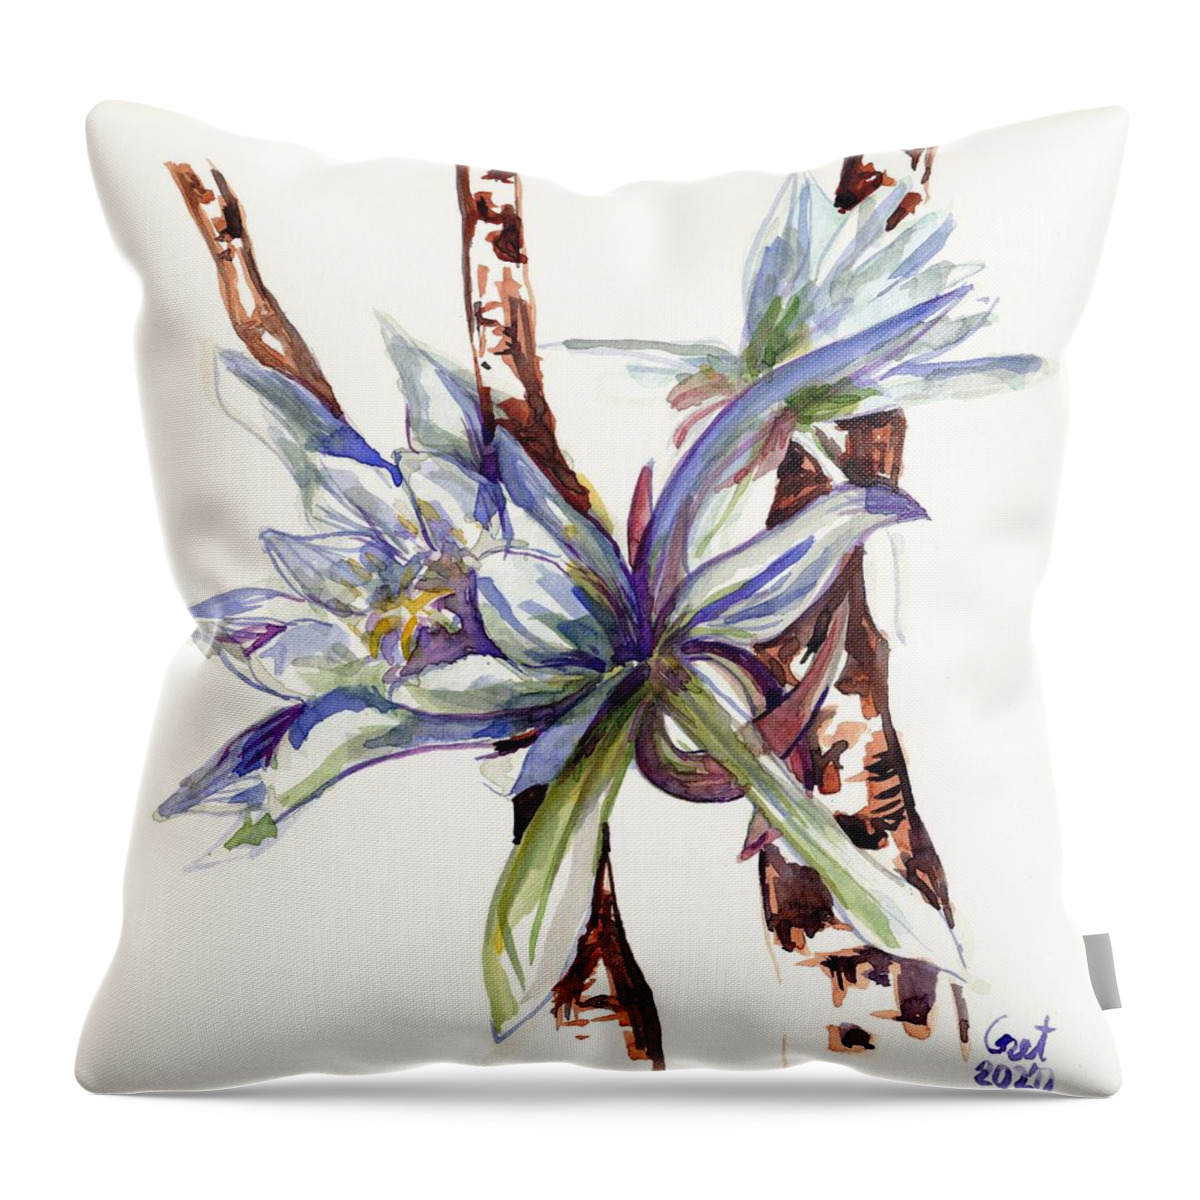 Kadapul Throw Pillow featuring the painting The Queen of The NIght by George Cret